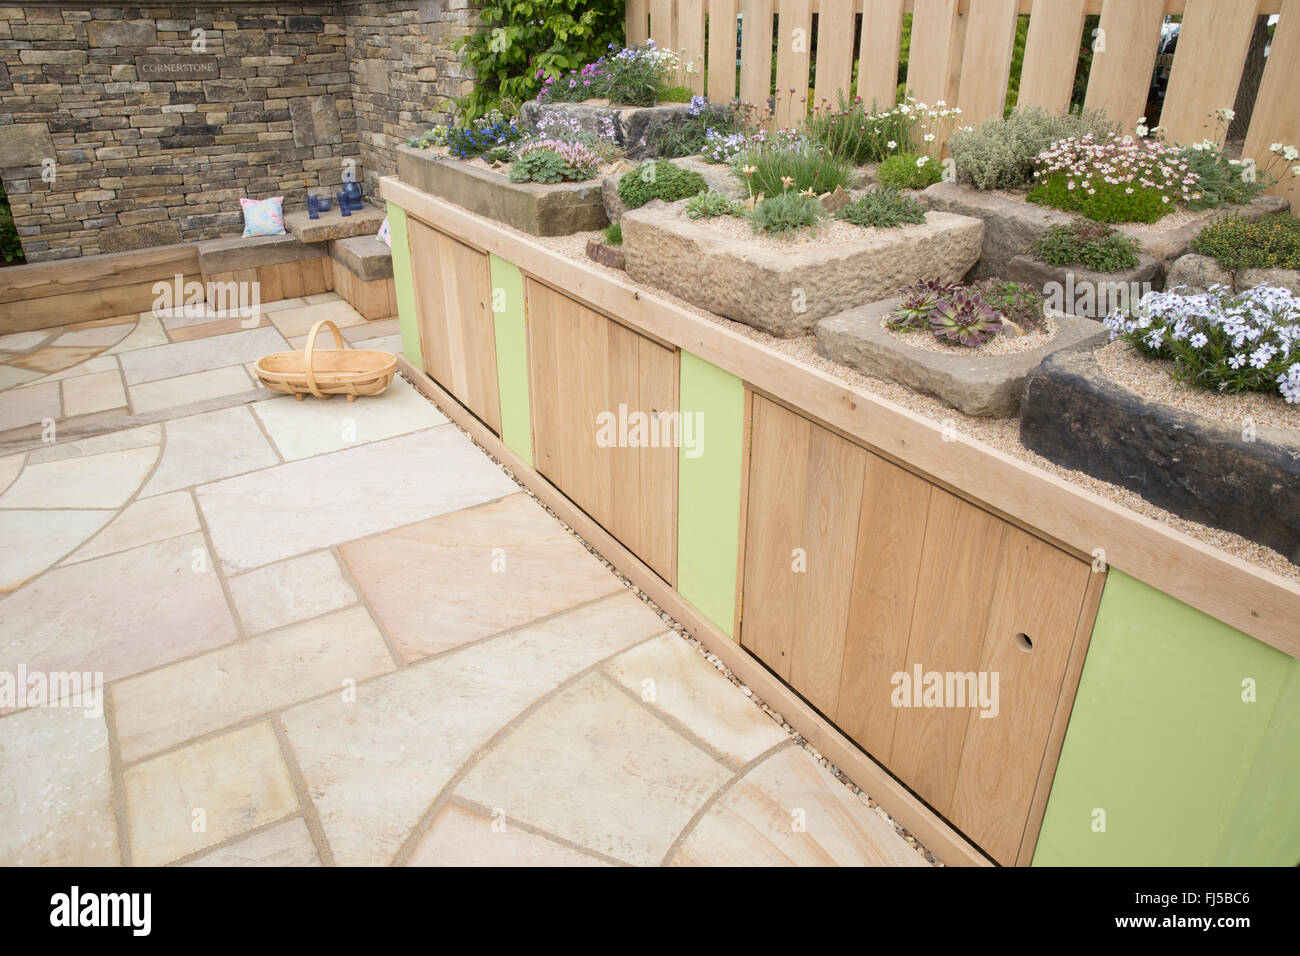 Small urban garden stone slabs patio storage cupboards a display of alpine plants in stone troughs containers container - seating area stone bench UK Stock Photo